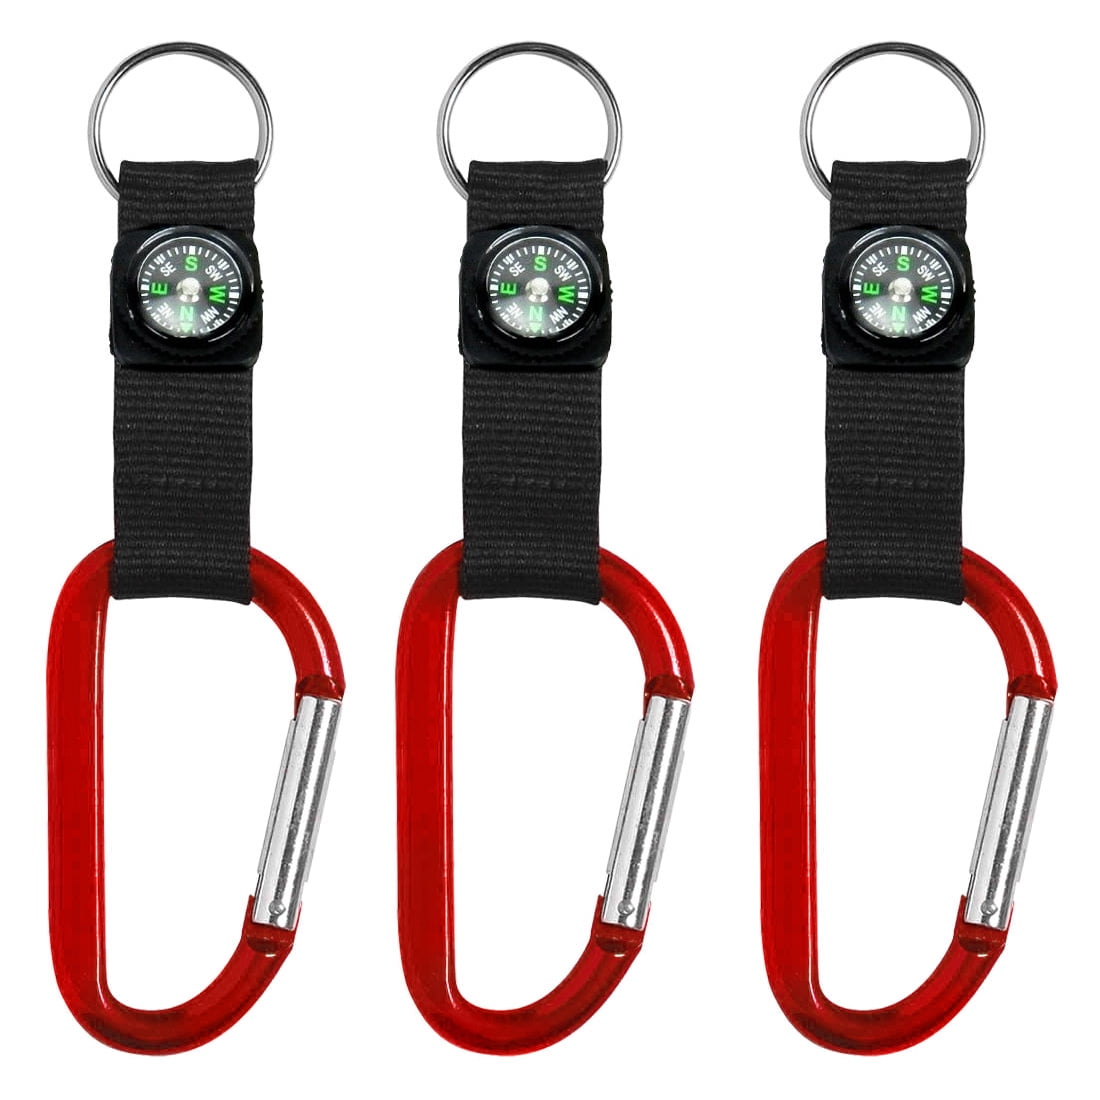 MagiDeal 3 In 1 Multi Tool Carabiner Buckle w/Compass Keyring Thermometer 